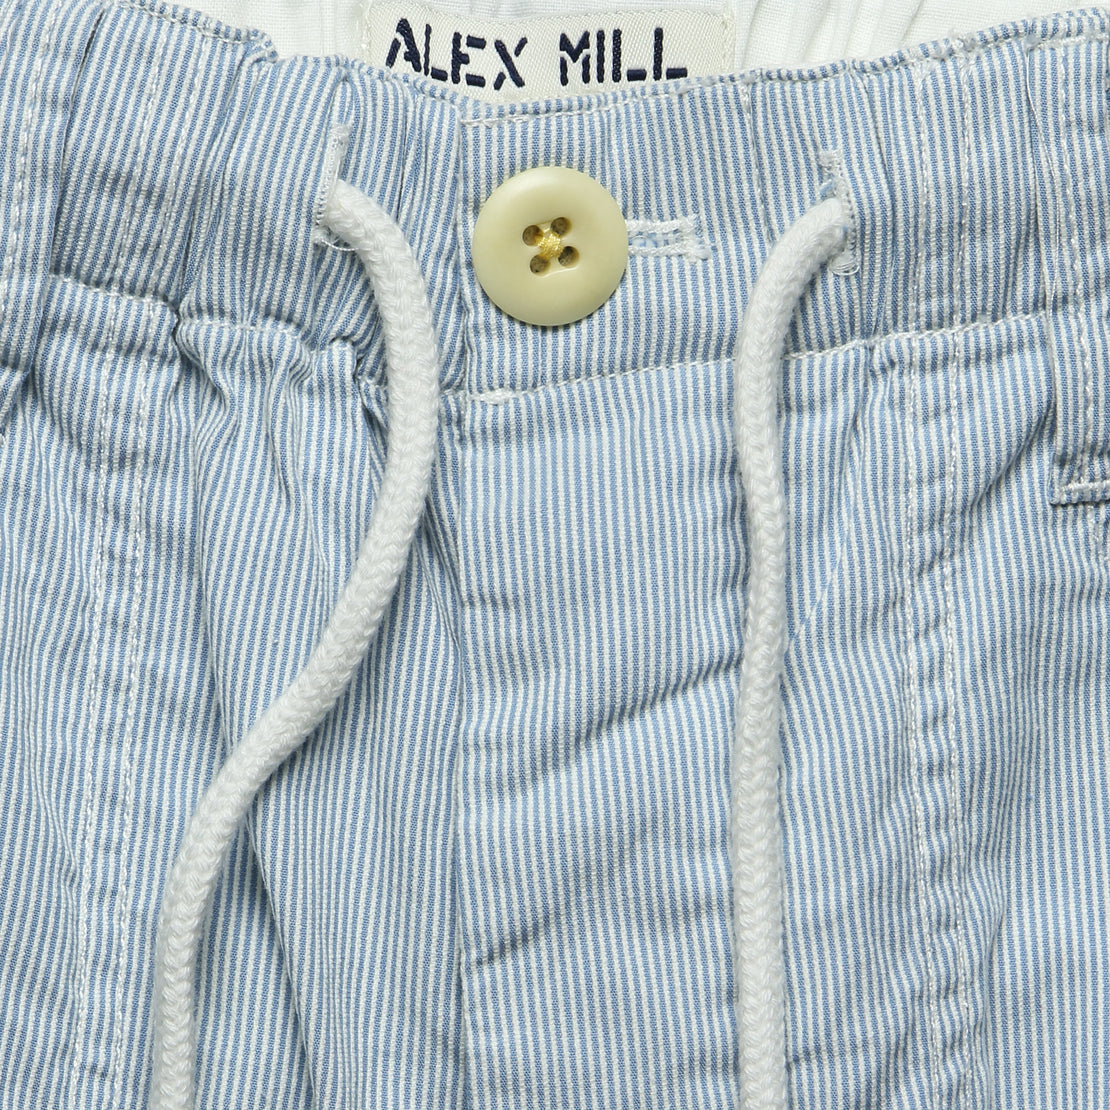 Pull-on Striped Short - Blue/White - Alex Mill - STAG Provisions - Shorts - Solid